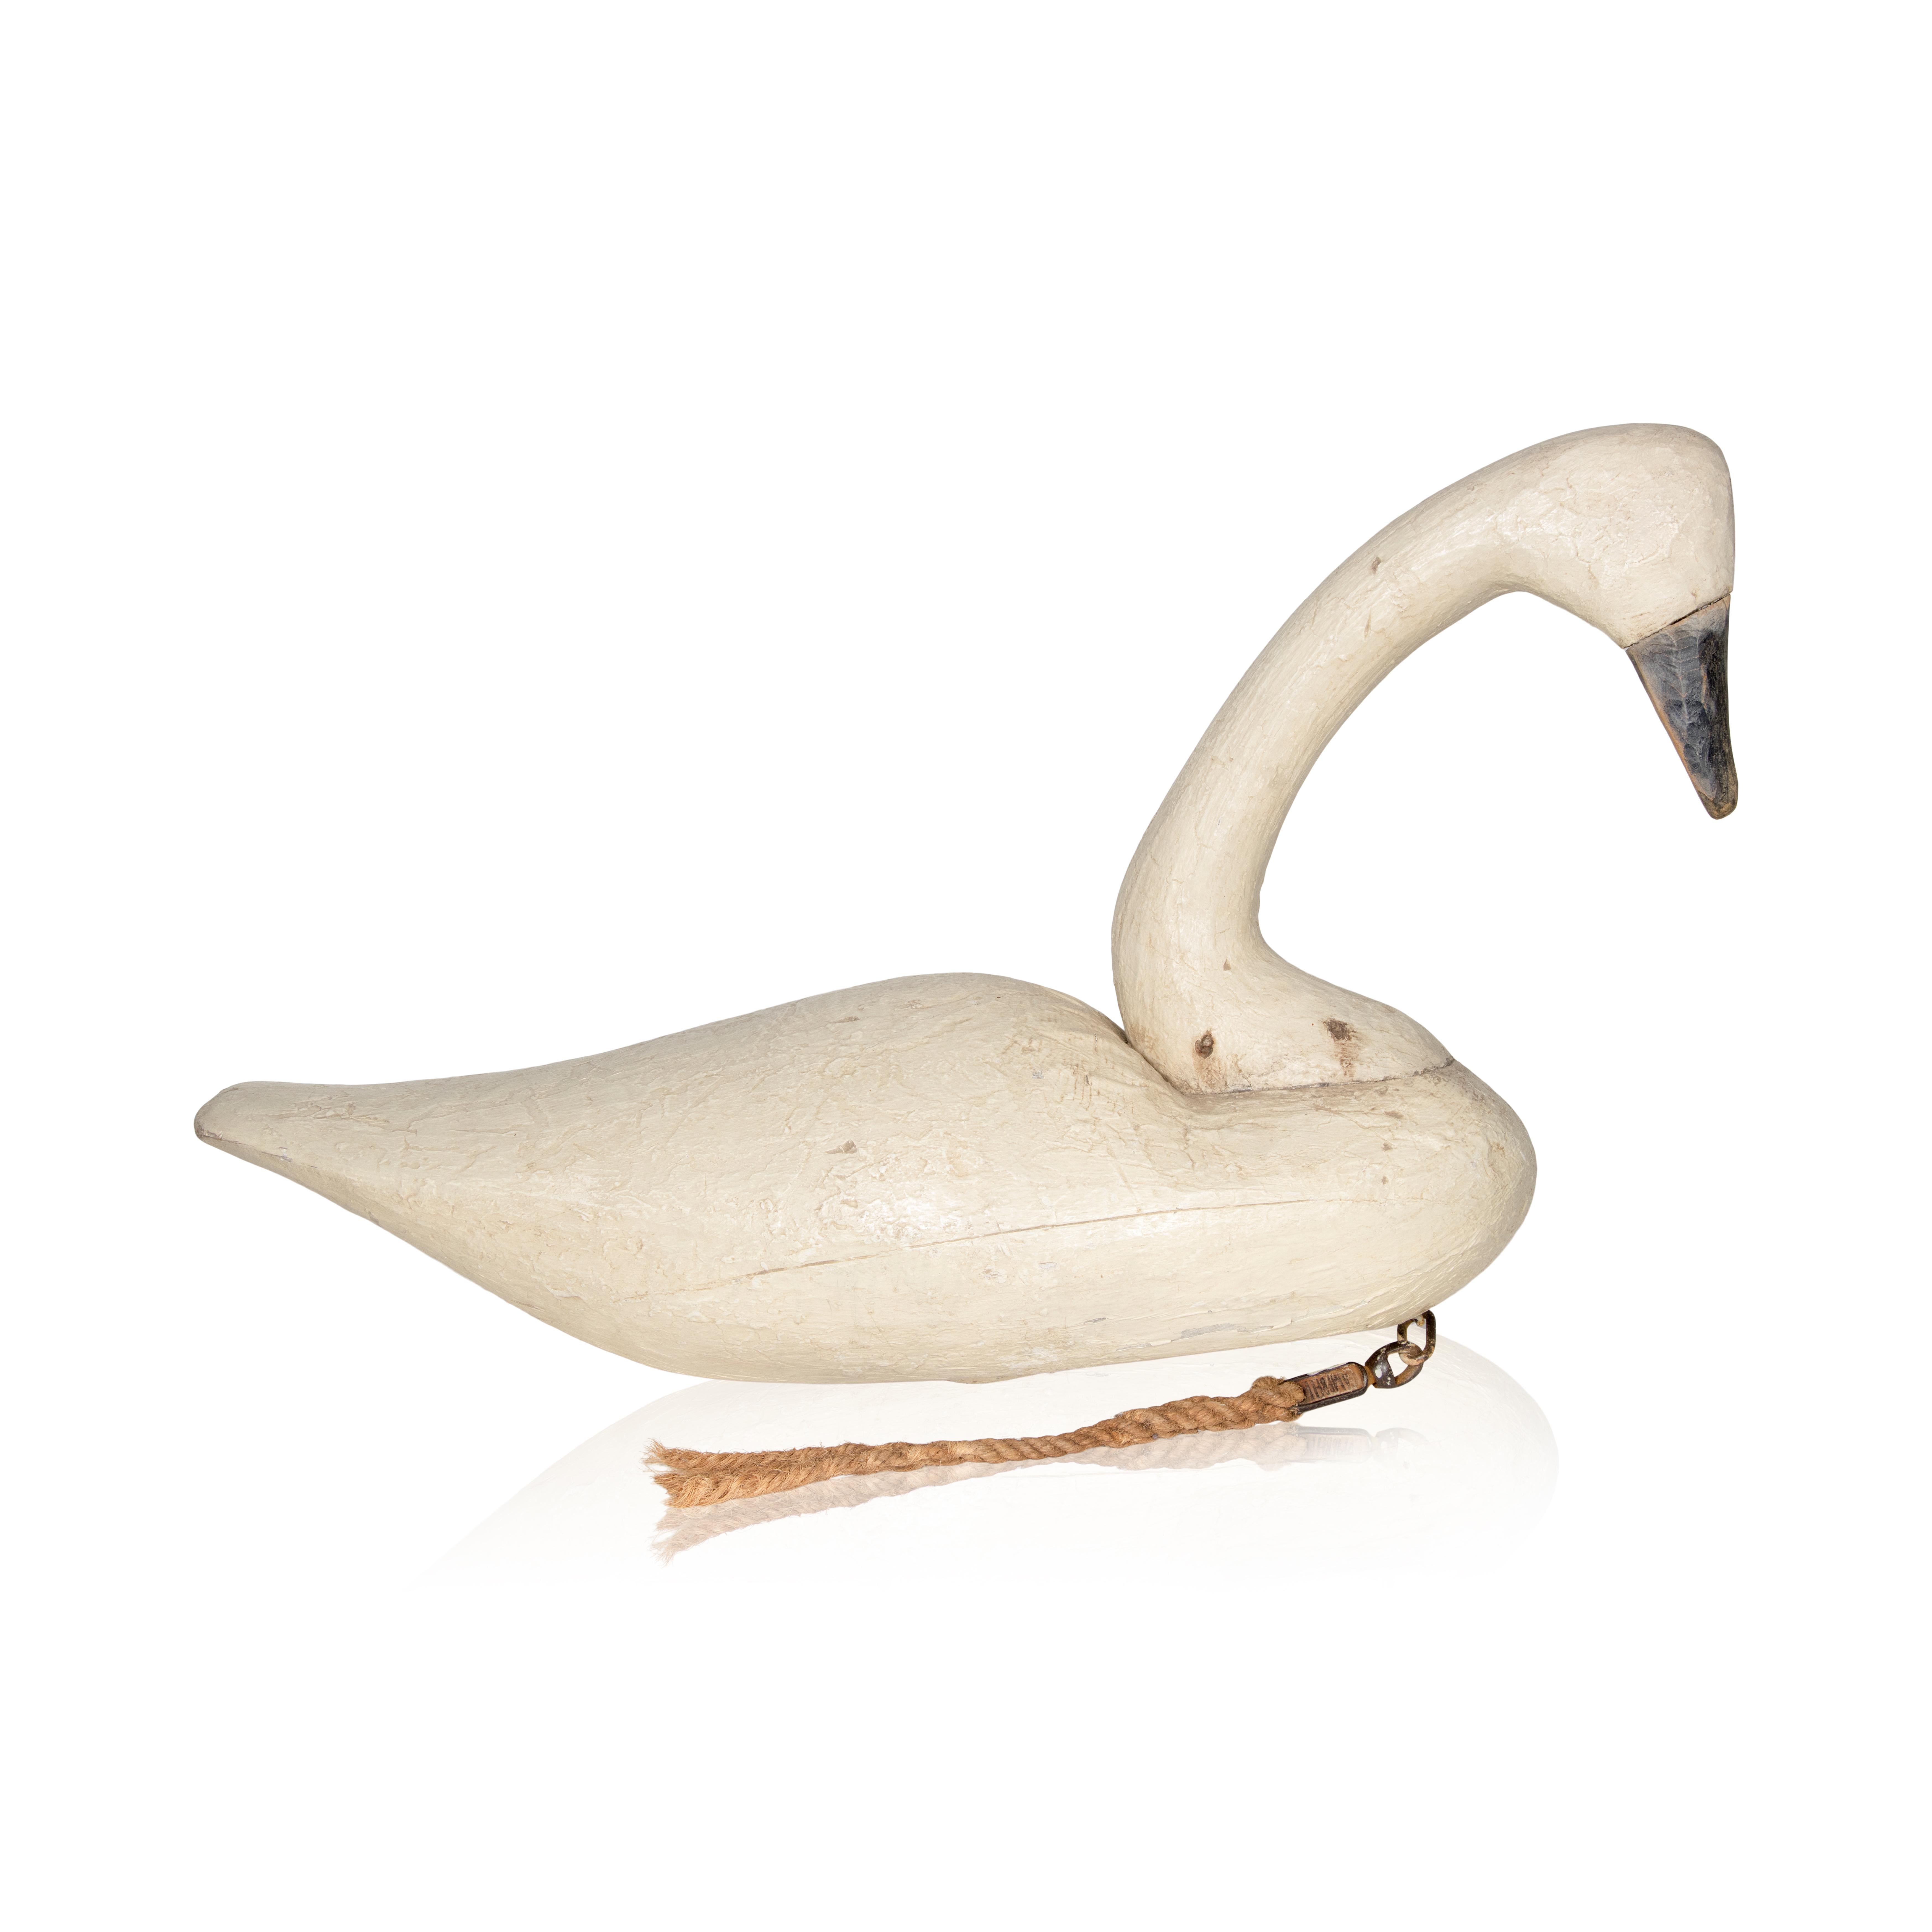 Swan decoy by Frank Finney (1947 - ) of Cape Charles, Virginia. This large swan is made in the style of the famous John Williams. Frank is considered one of the finest makers of decoy and fine bird carvings. As a folk artist and carver Frank works